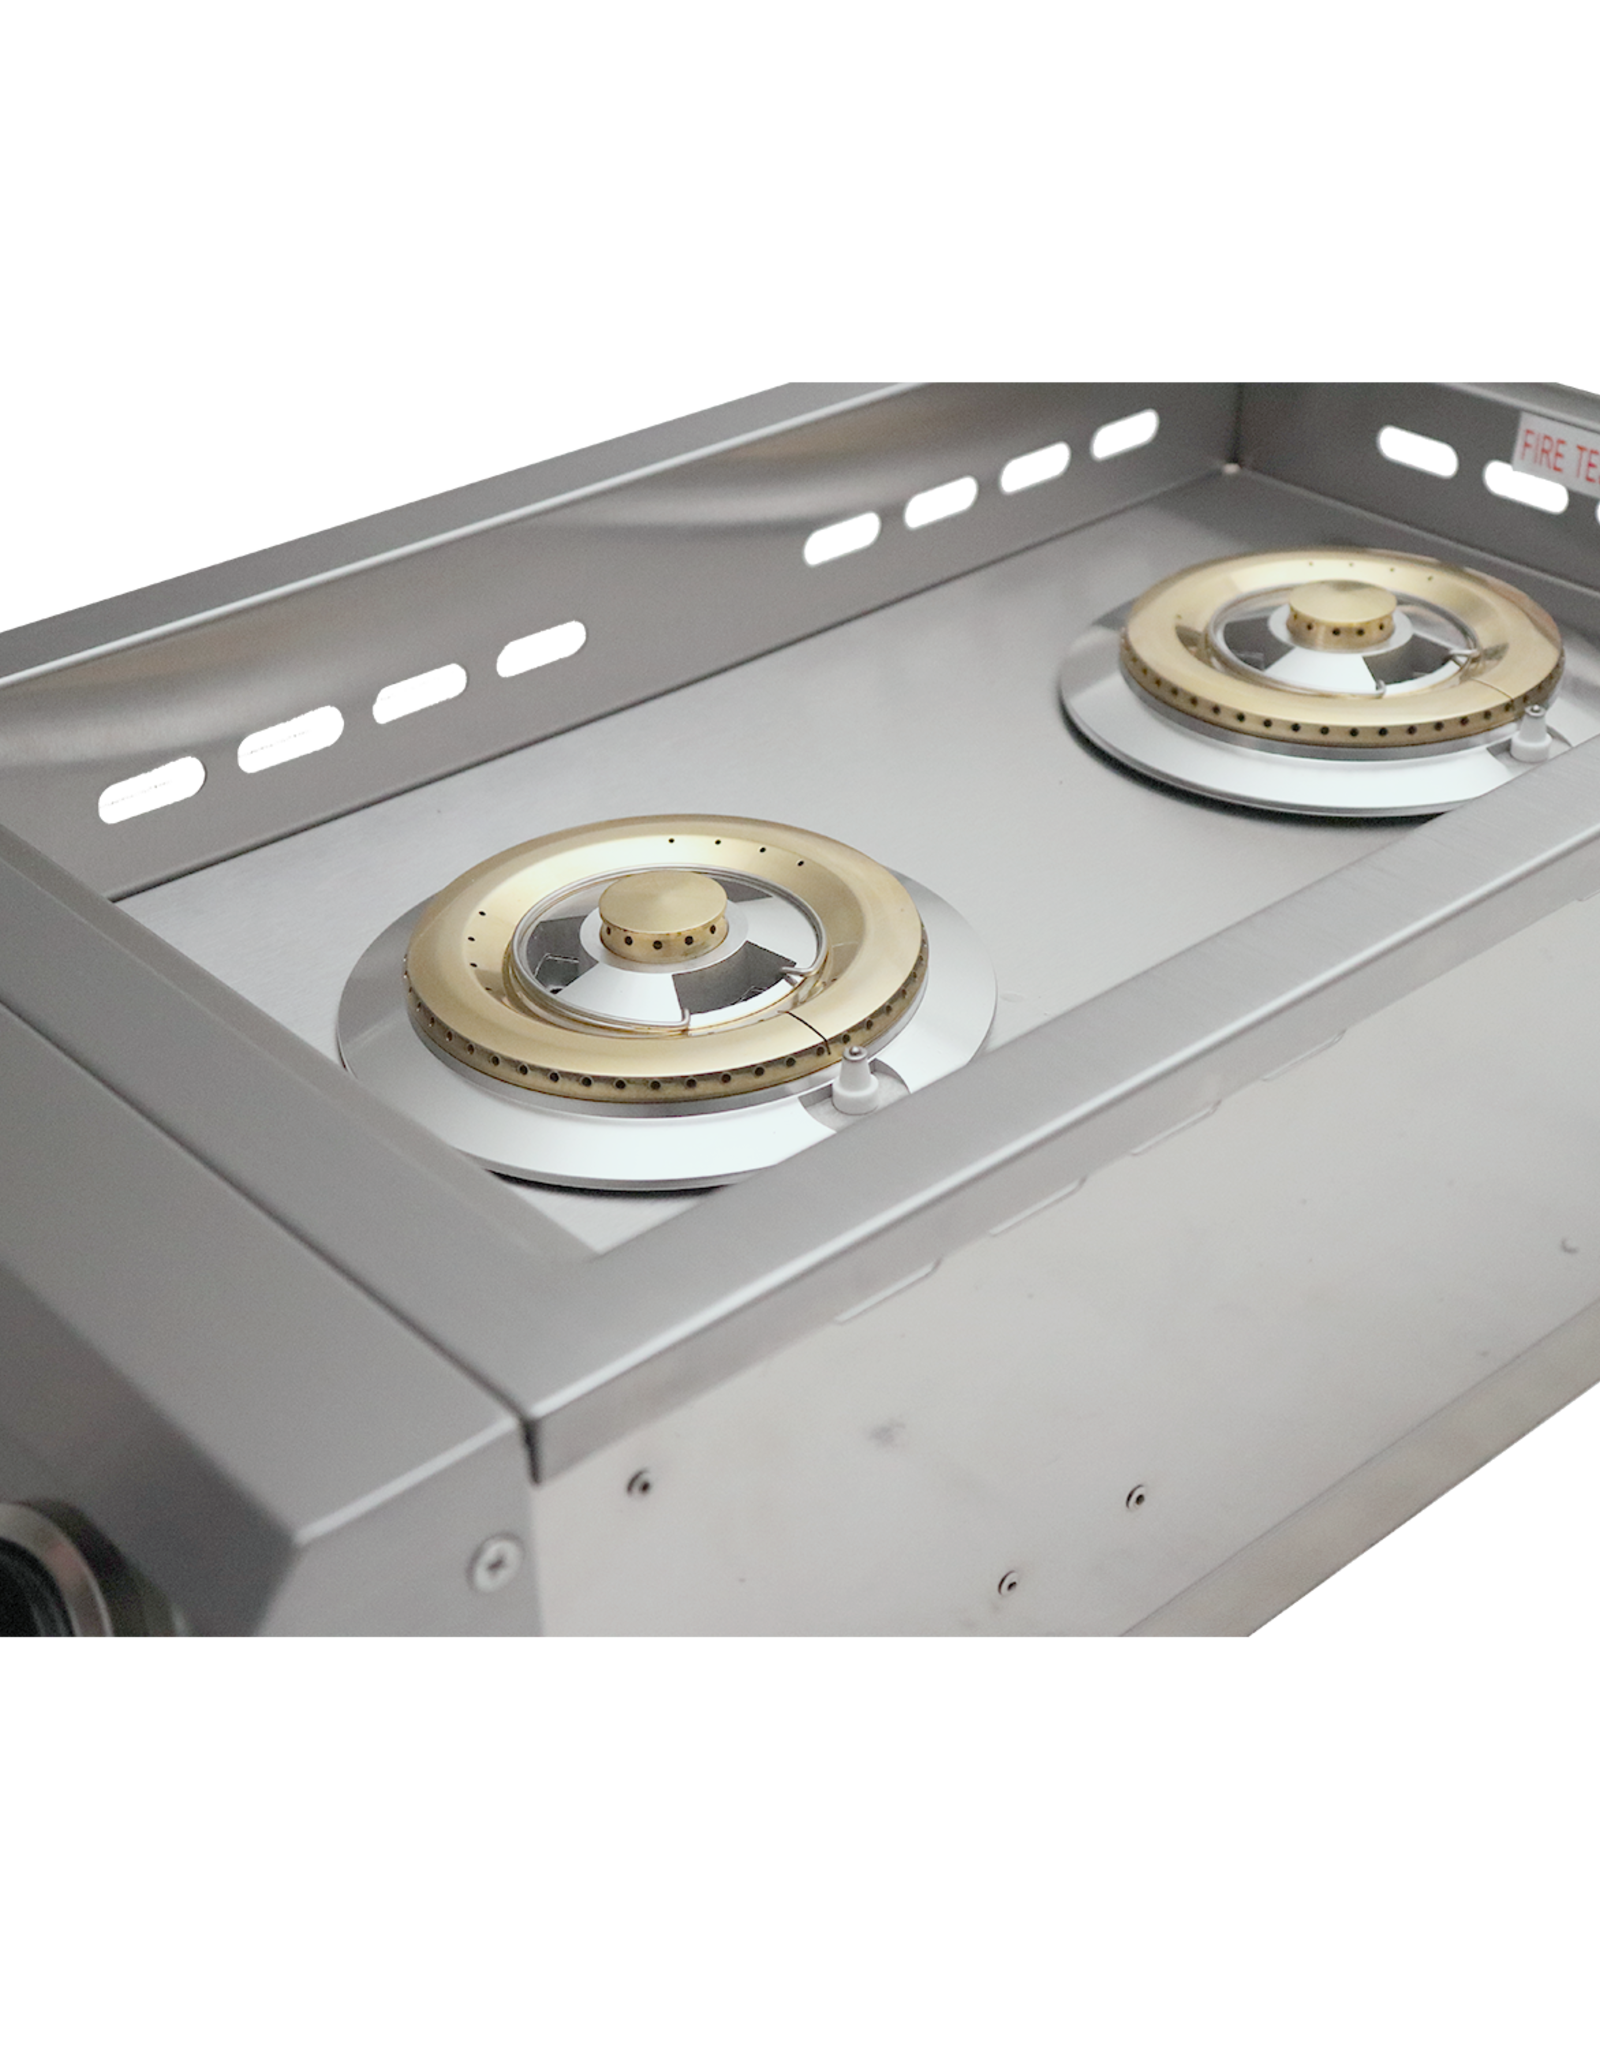 Renaissance Cooking Systems Renaissance Cooking Systems The Premier Series Double Side Burner with LED Lights - RJCSSBL